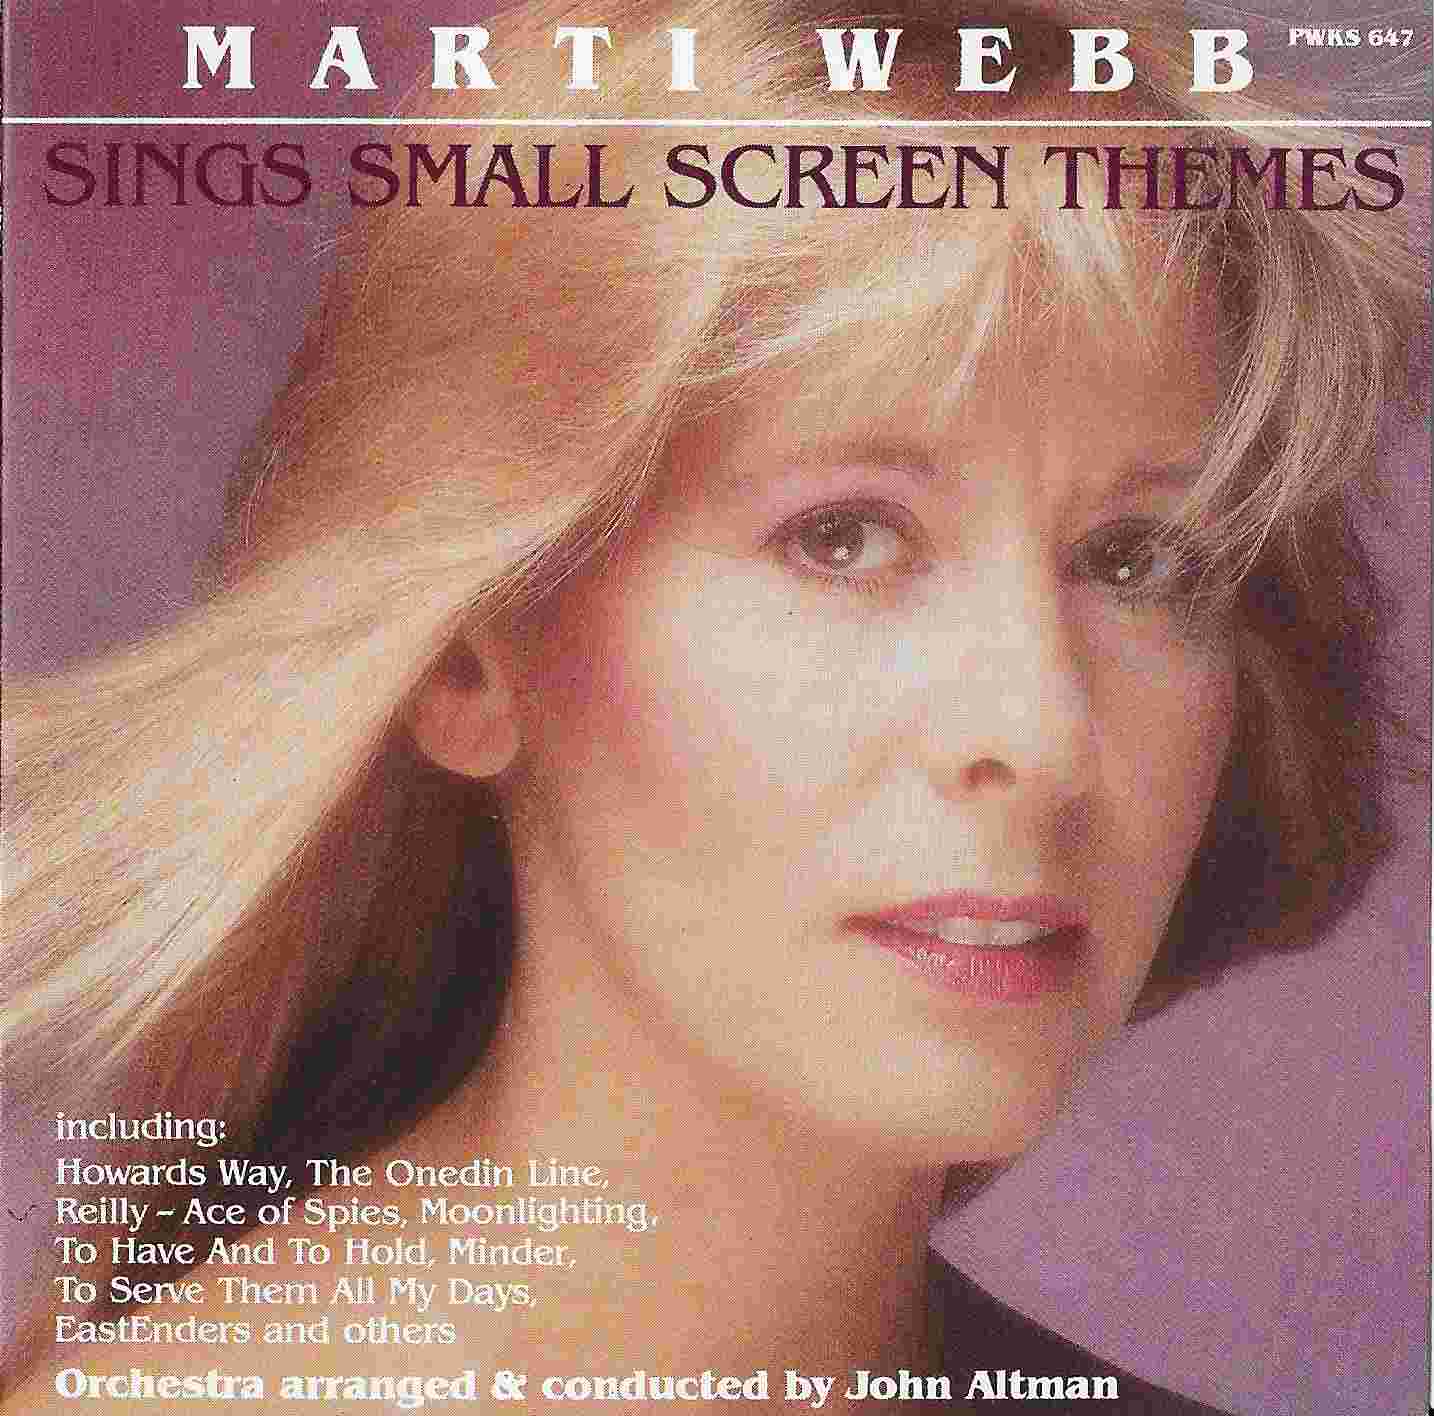 Picture of PWKS 647 Always there by artist Marti Webb from the BBC cds - Records and Tapes library